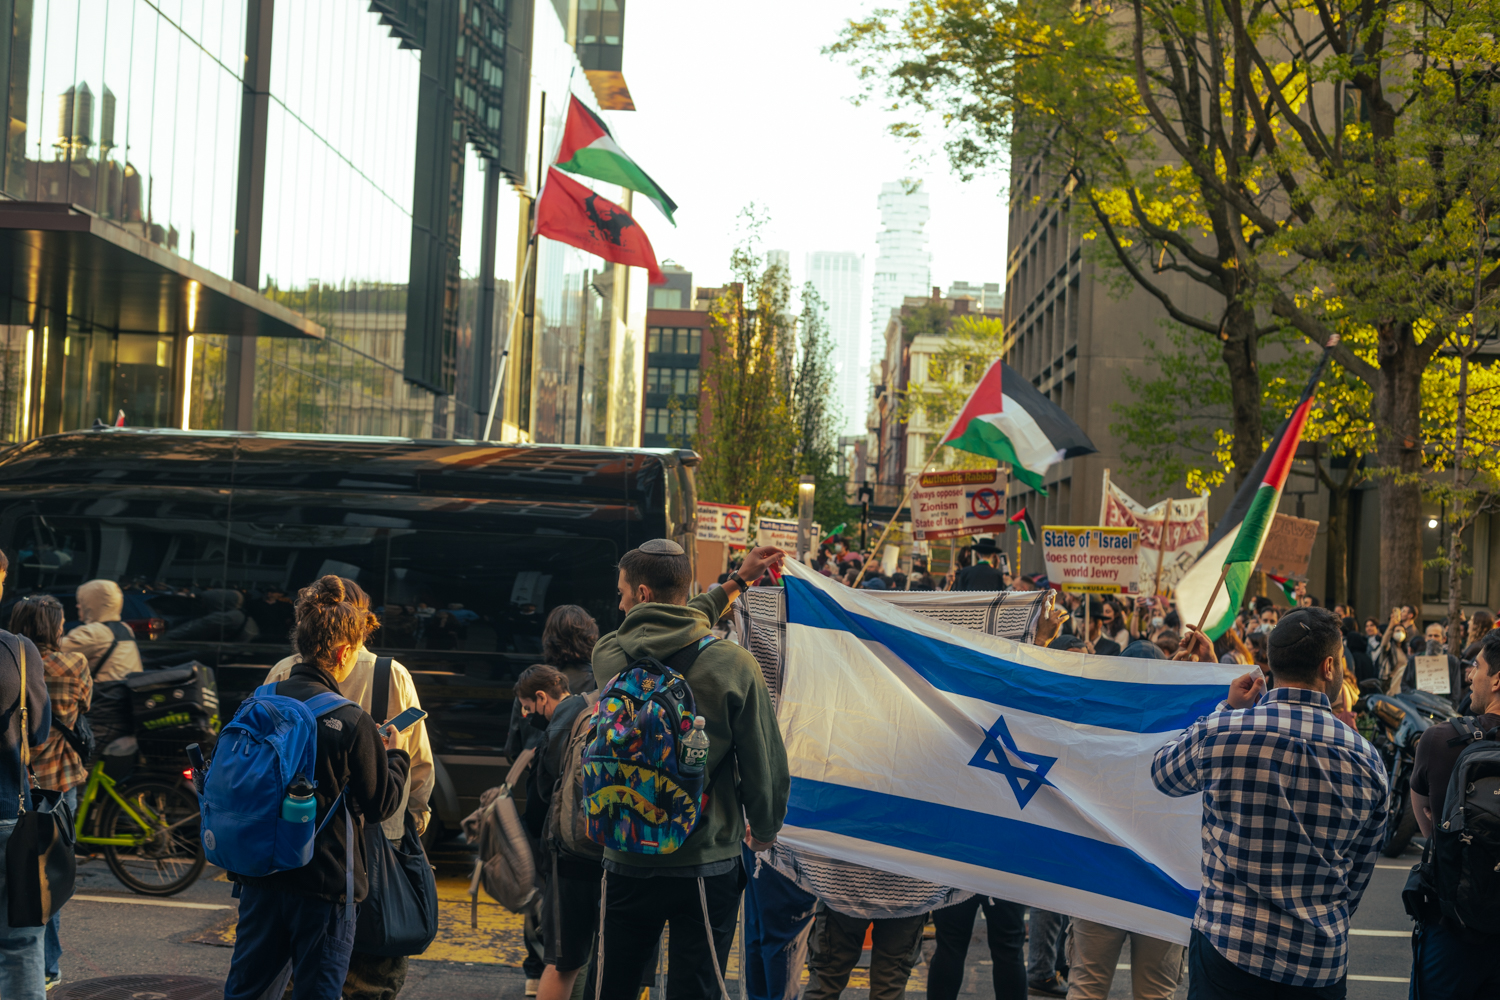 A group of pro-Israeli counterprotesters hold up an Israeli flag across the street from the encampment, where pro-Palestinian protesters are chanting.